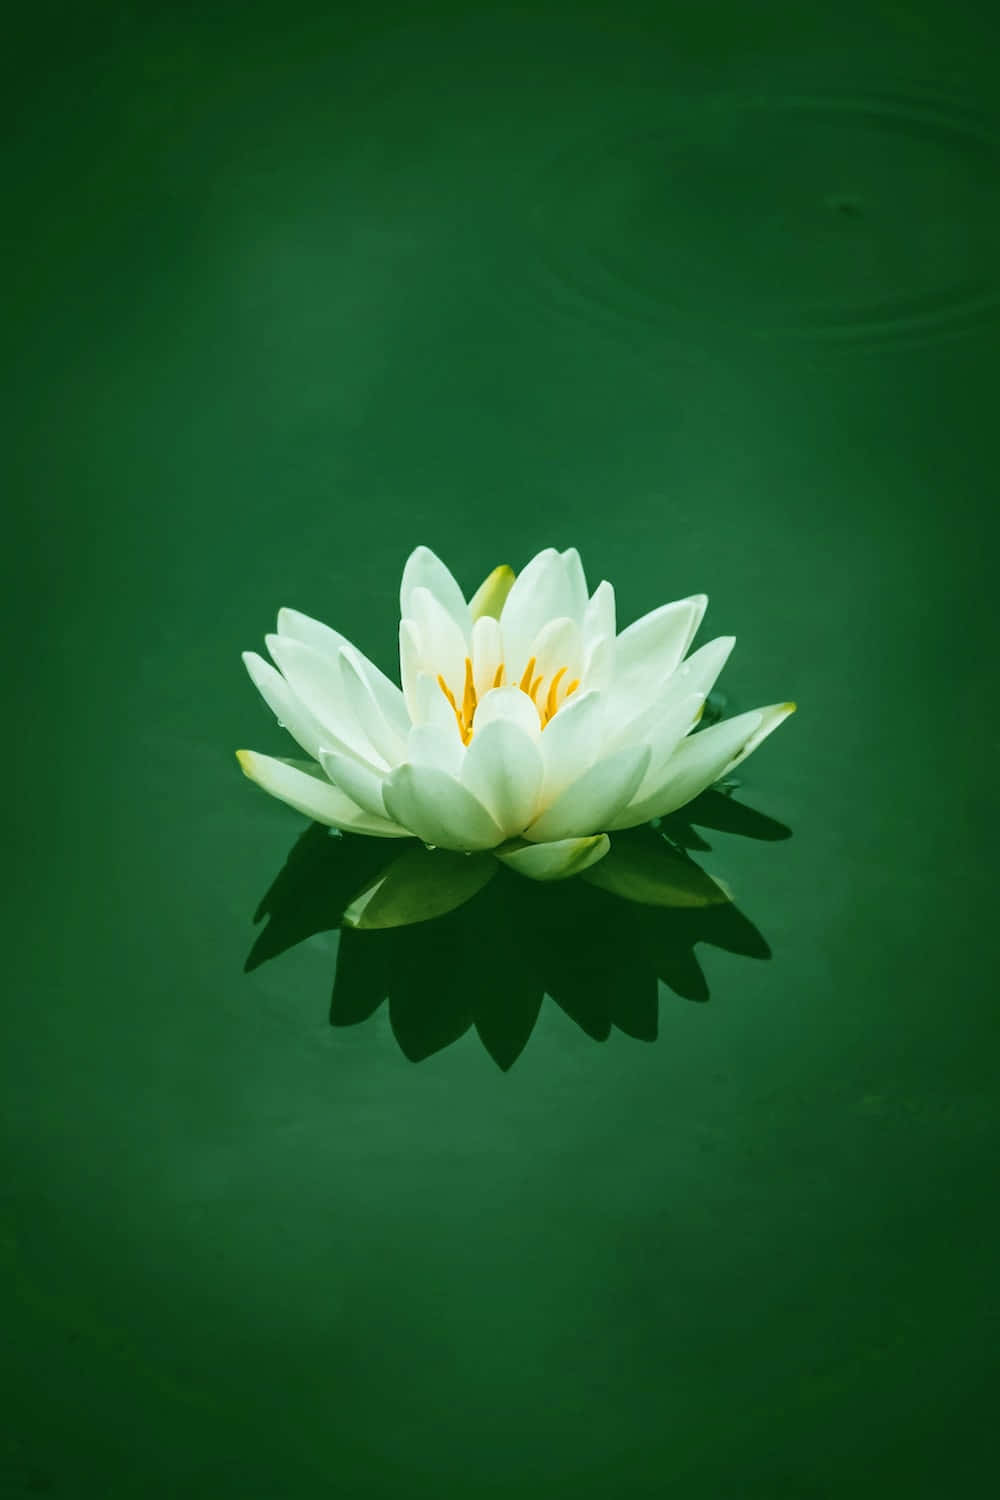 A White Lotus Flower Floating In A Green Pond